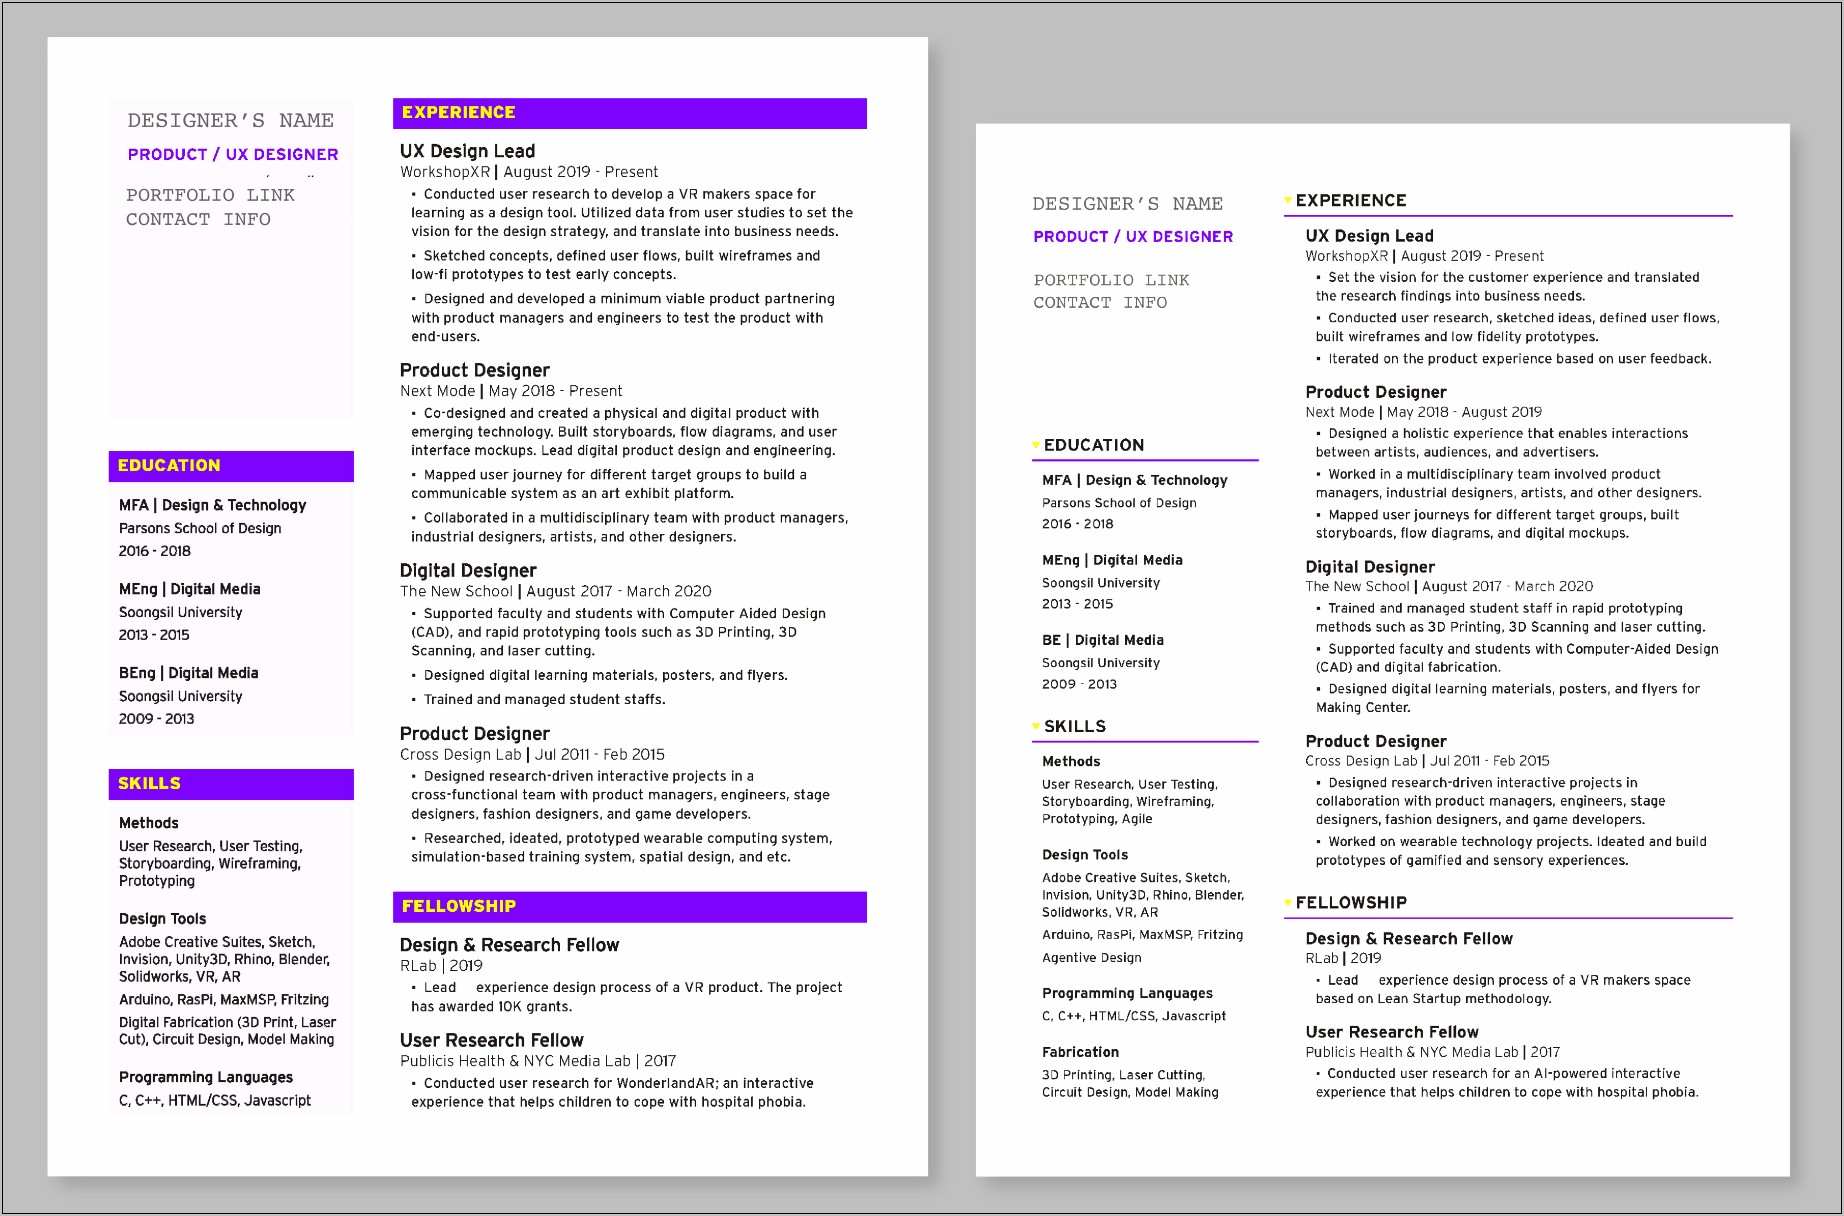 Resume That Looks Good But Works With Scanners